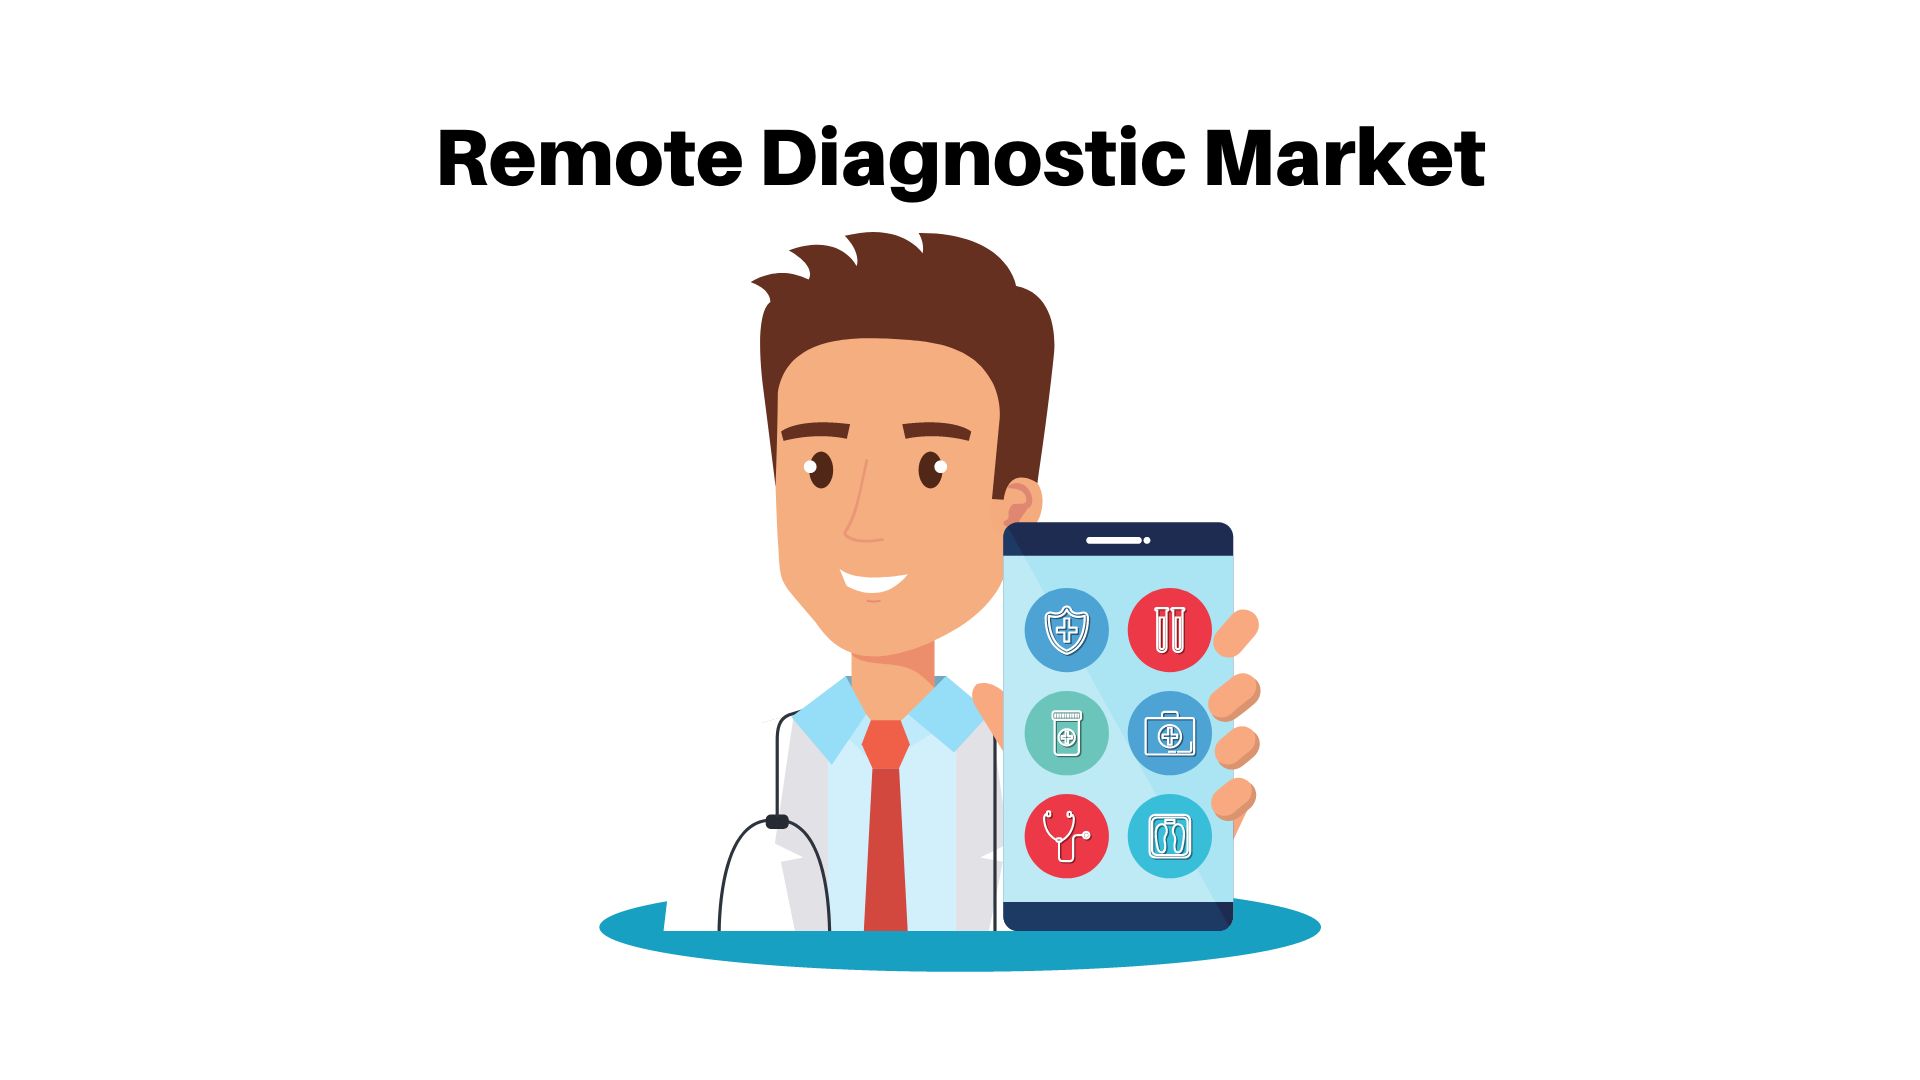 Remote Diagnostics Market to Create Favourable Opportunities for Producers 2023 | CAGR Of 14.79%